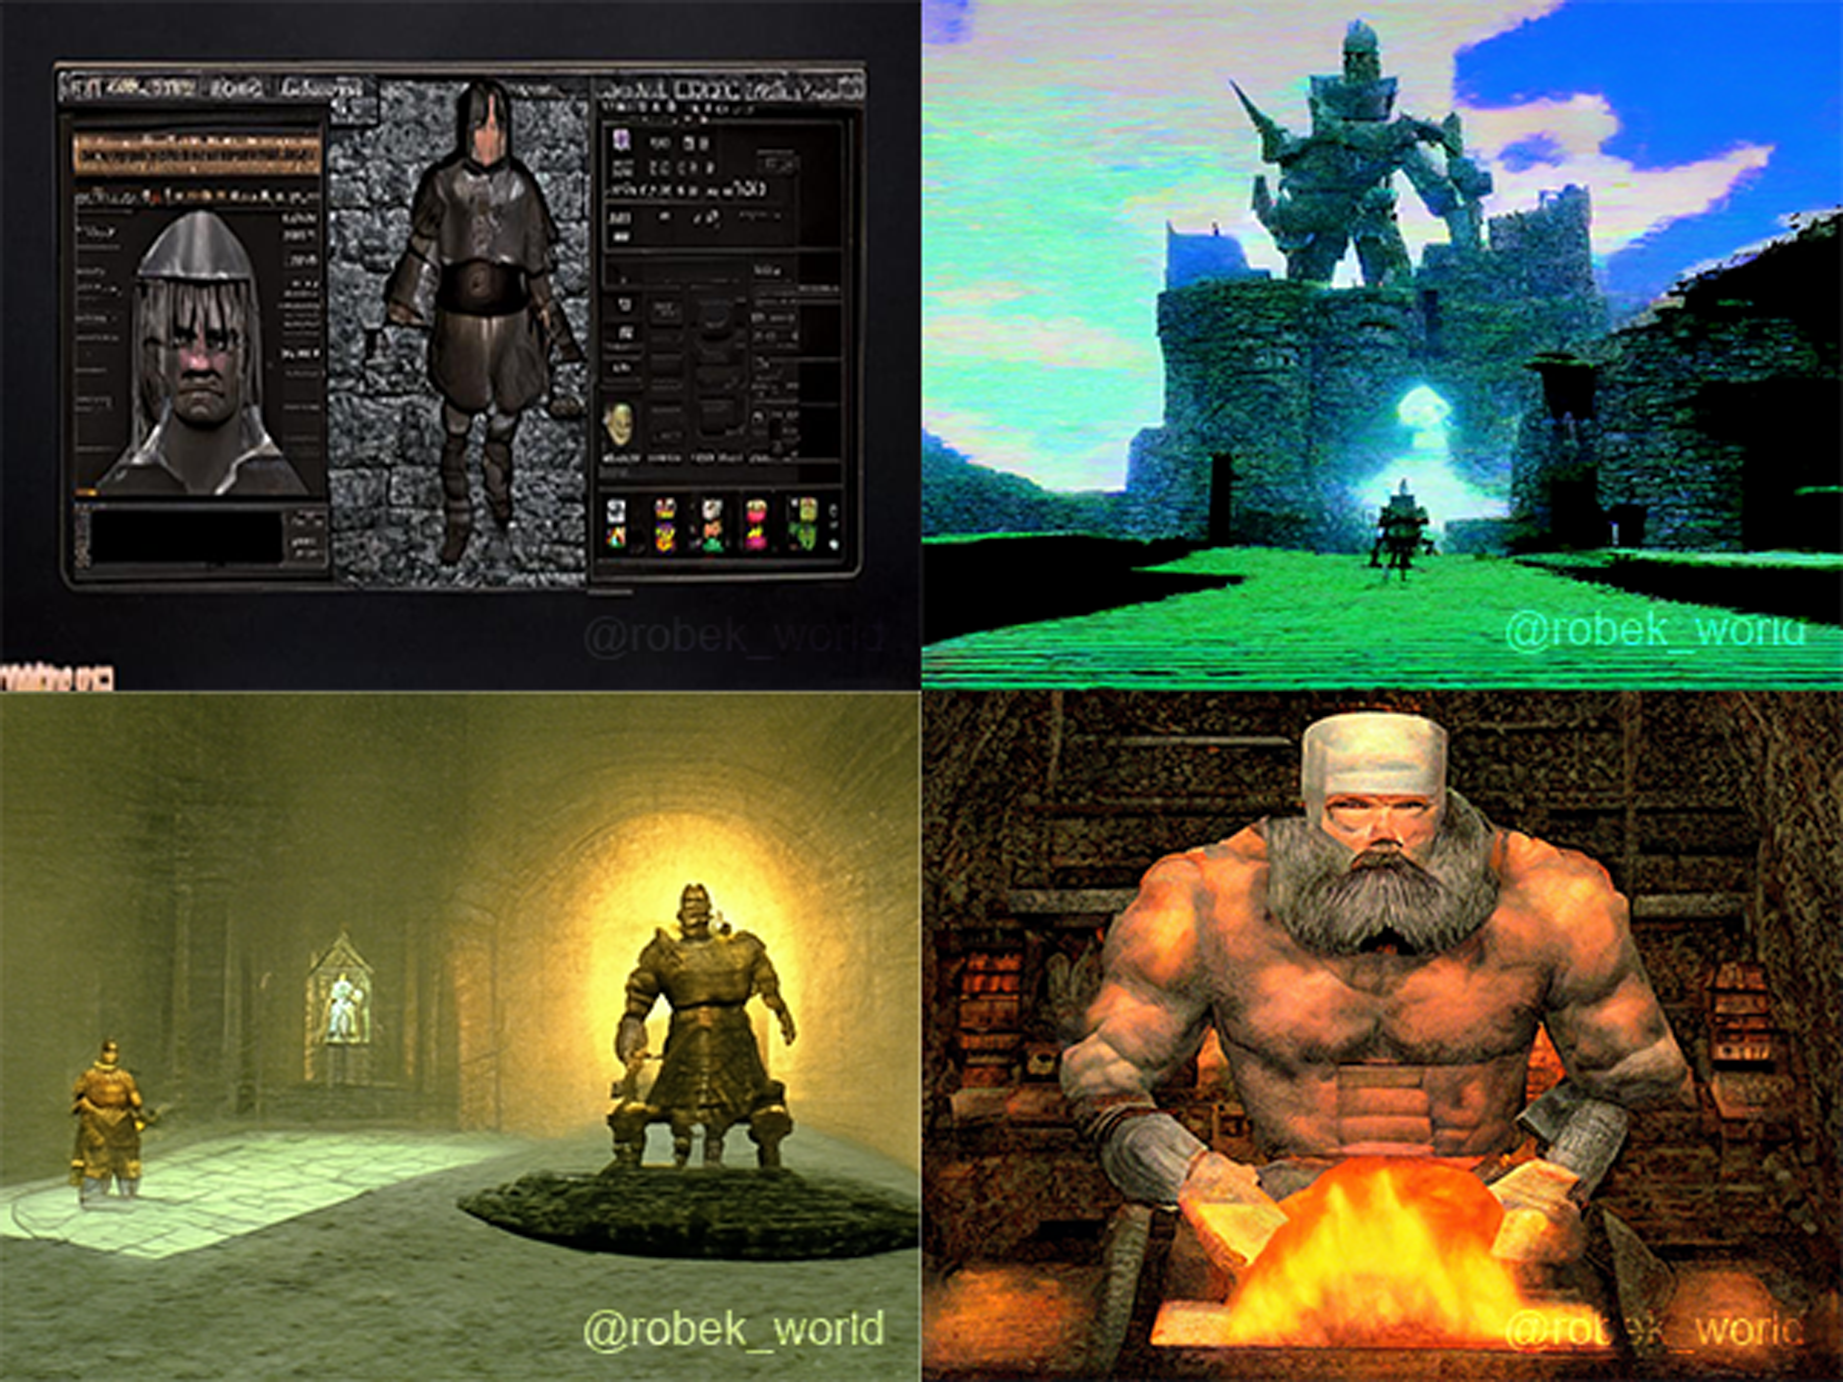 A lot of memories in this game from the incredible character creator, to crossing the dragon bridge, to the Ornstein and Smough fight, and our favorite blacksmith Andre